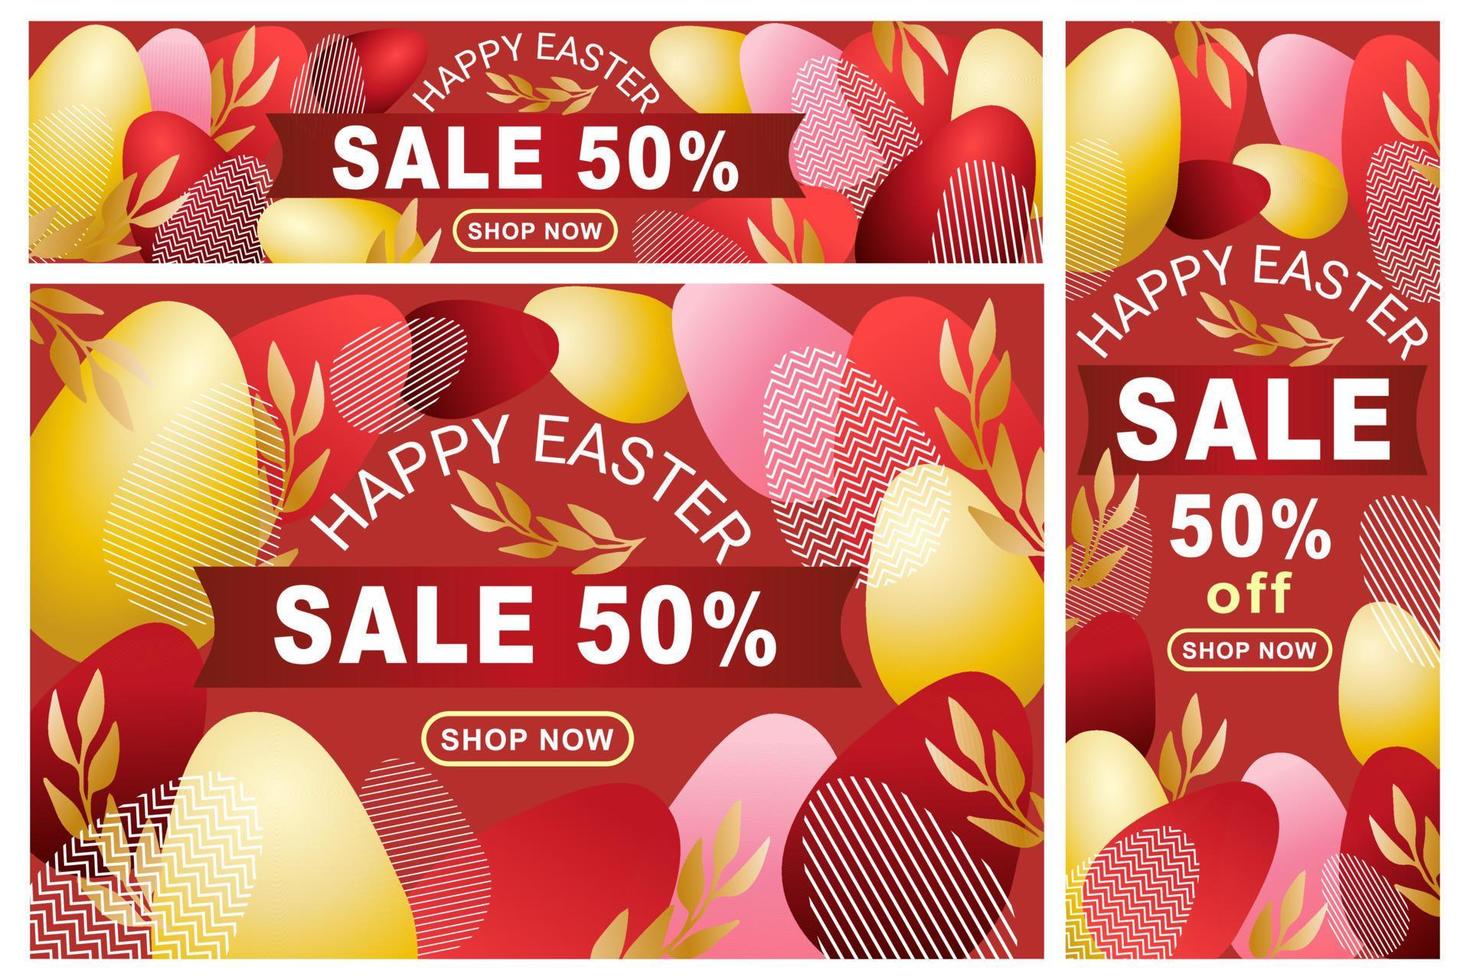 Easter Sale promotional poster templates with golden eggs and branch vector